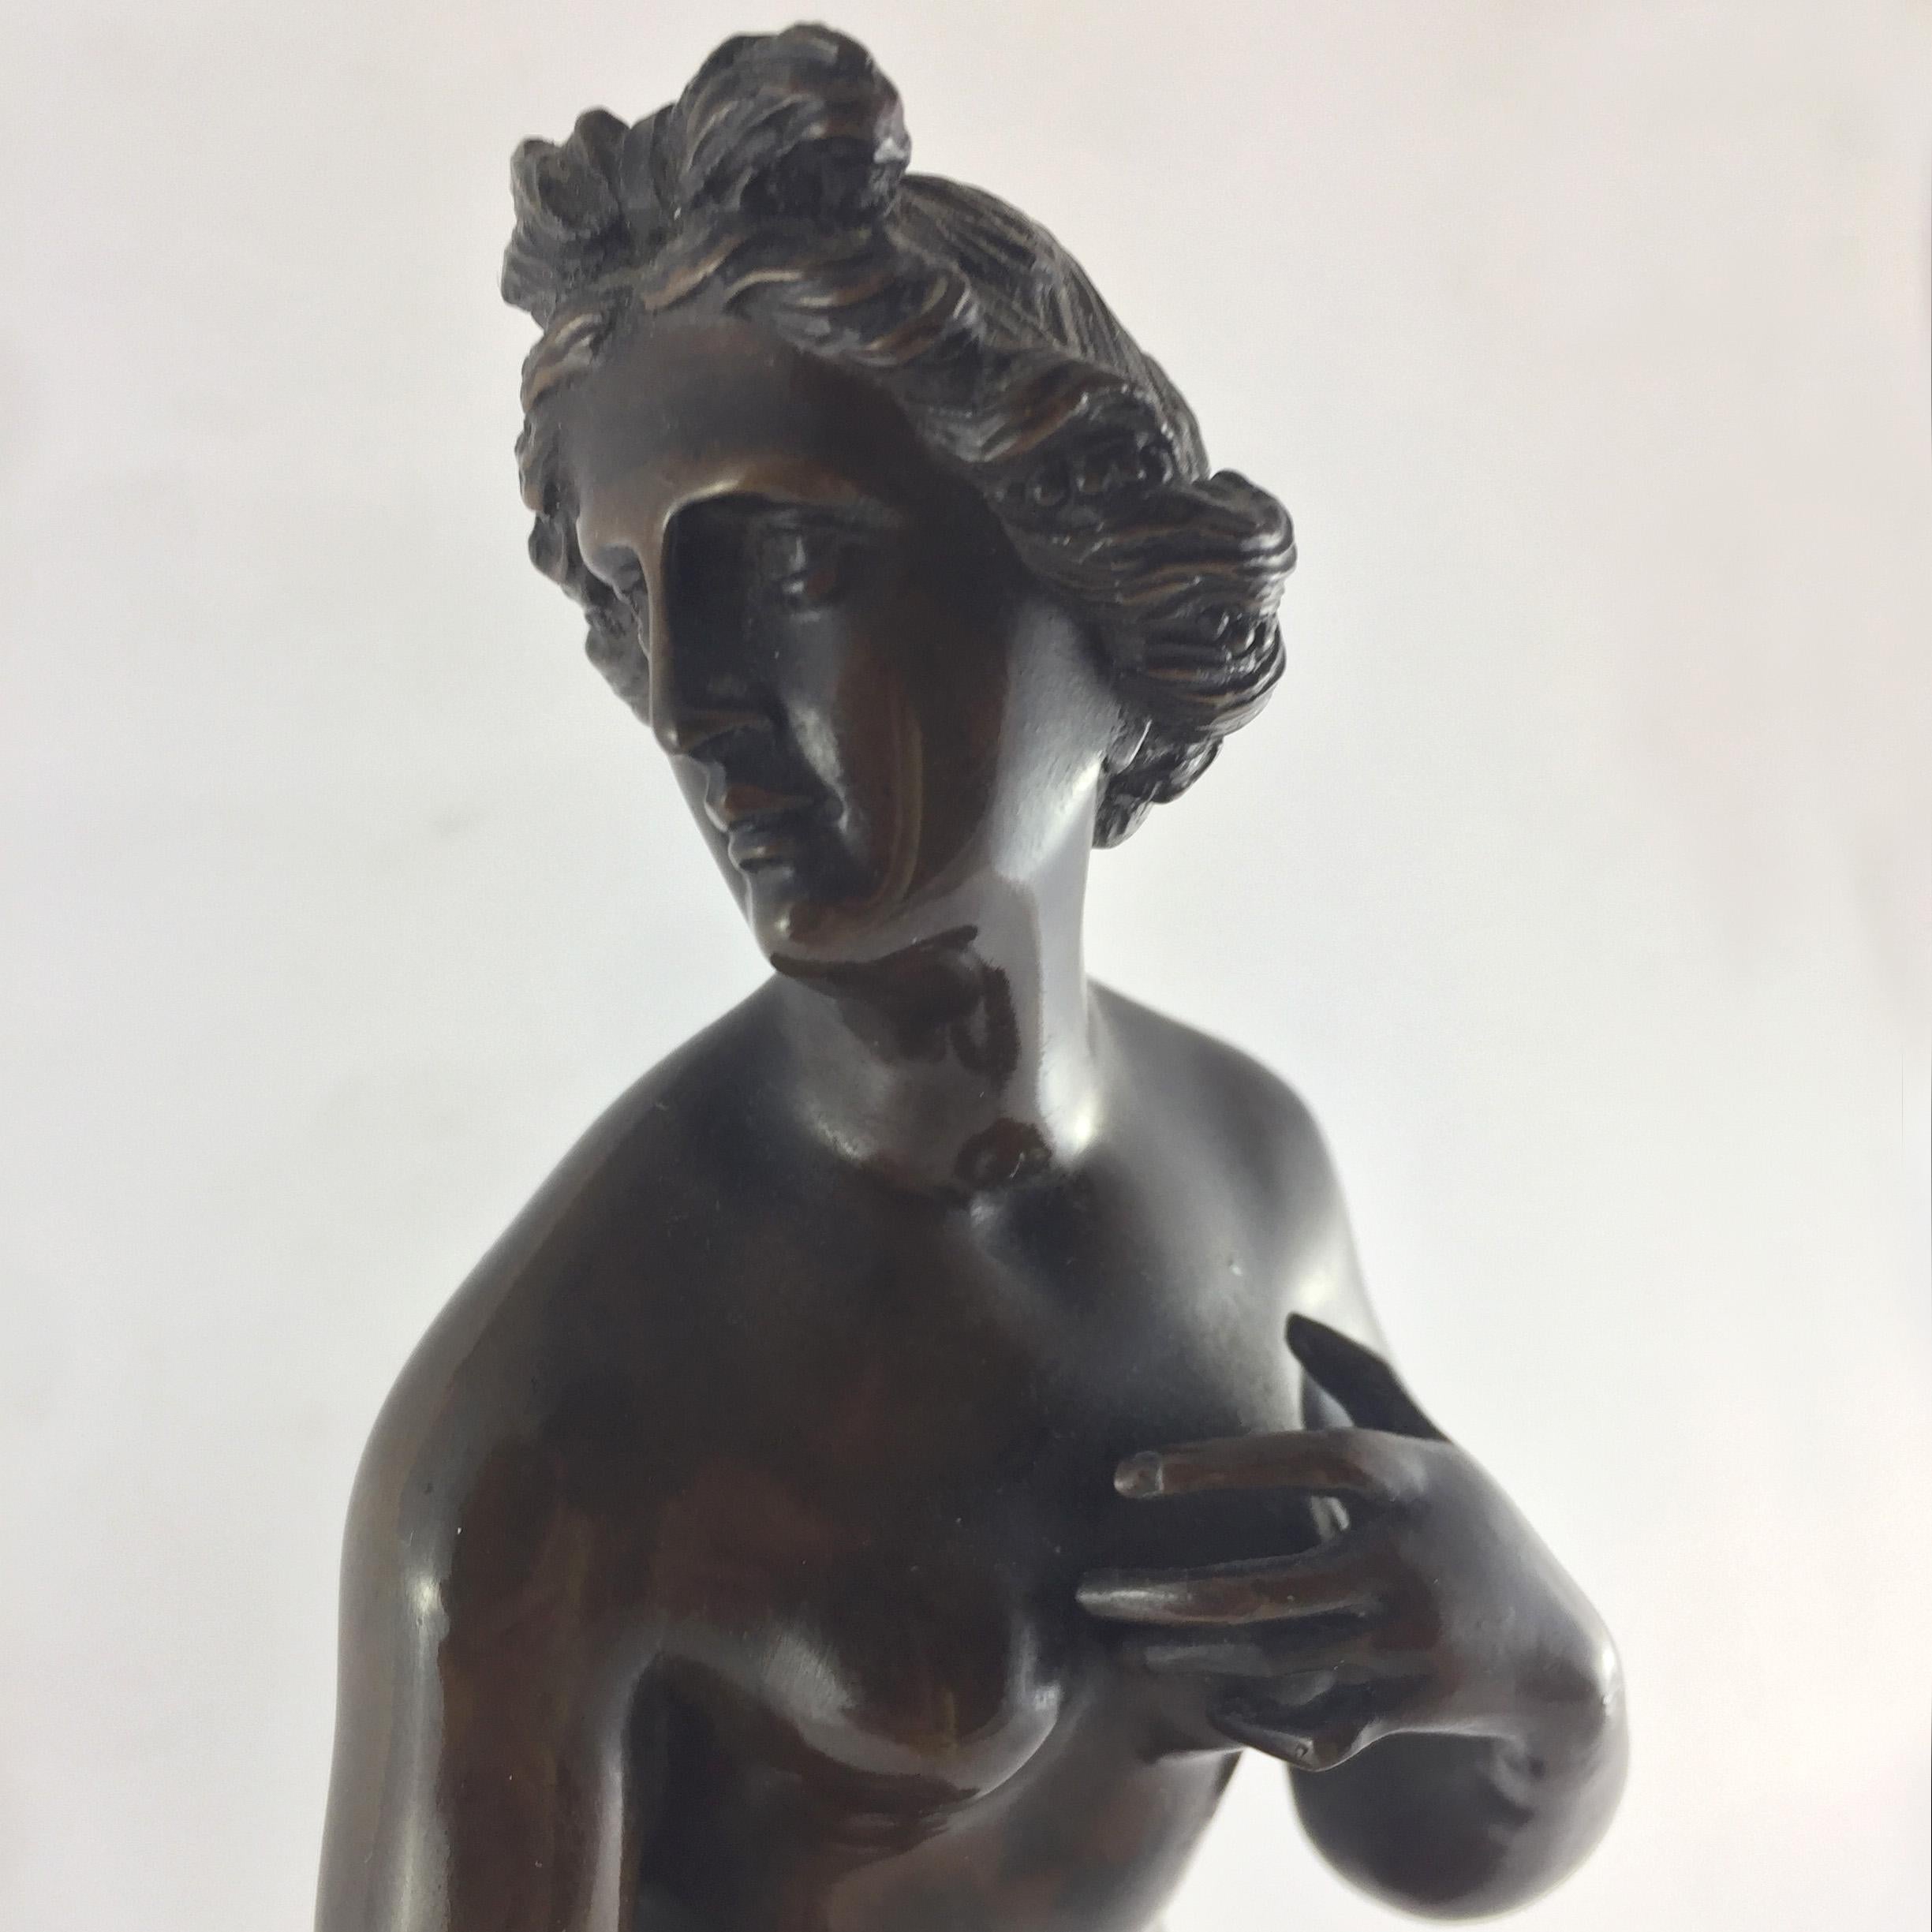 'Venere Bather' by H.S. München.
Lost wax cast Italian bronze sculpture, the subject reproduces 'Venere bather'. The base is made of Bardiglio red marble.
Italian manufacture, early 19th century.